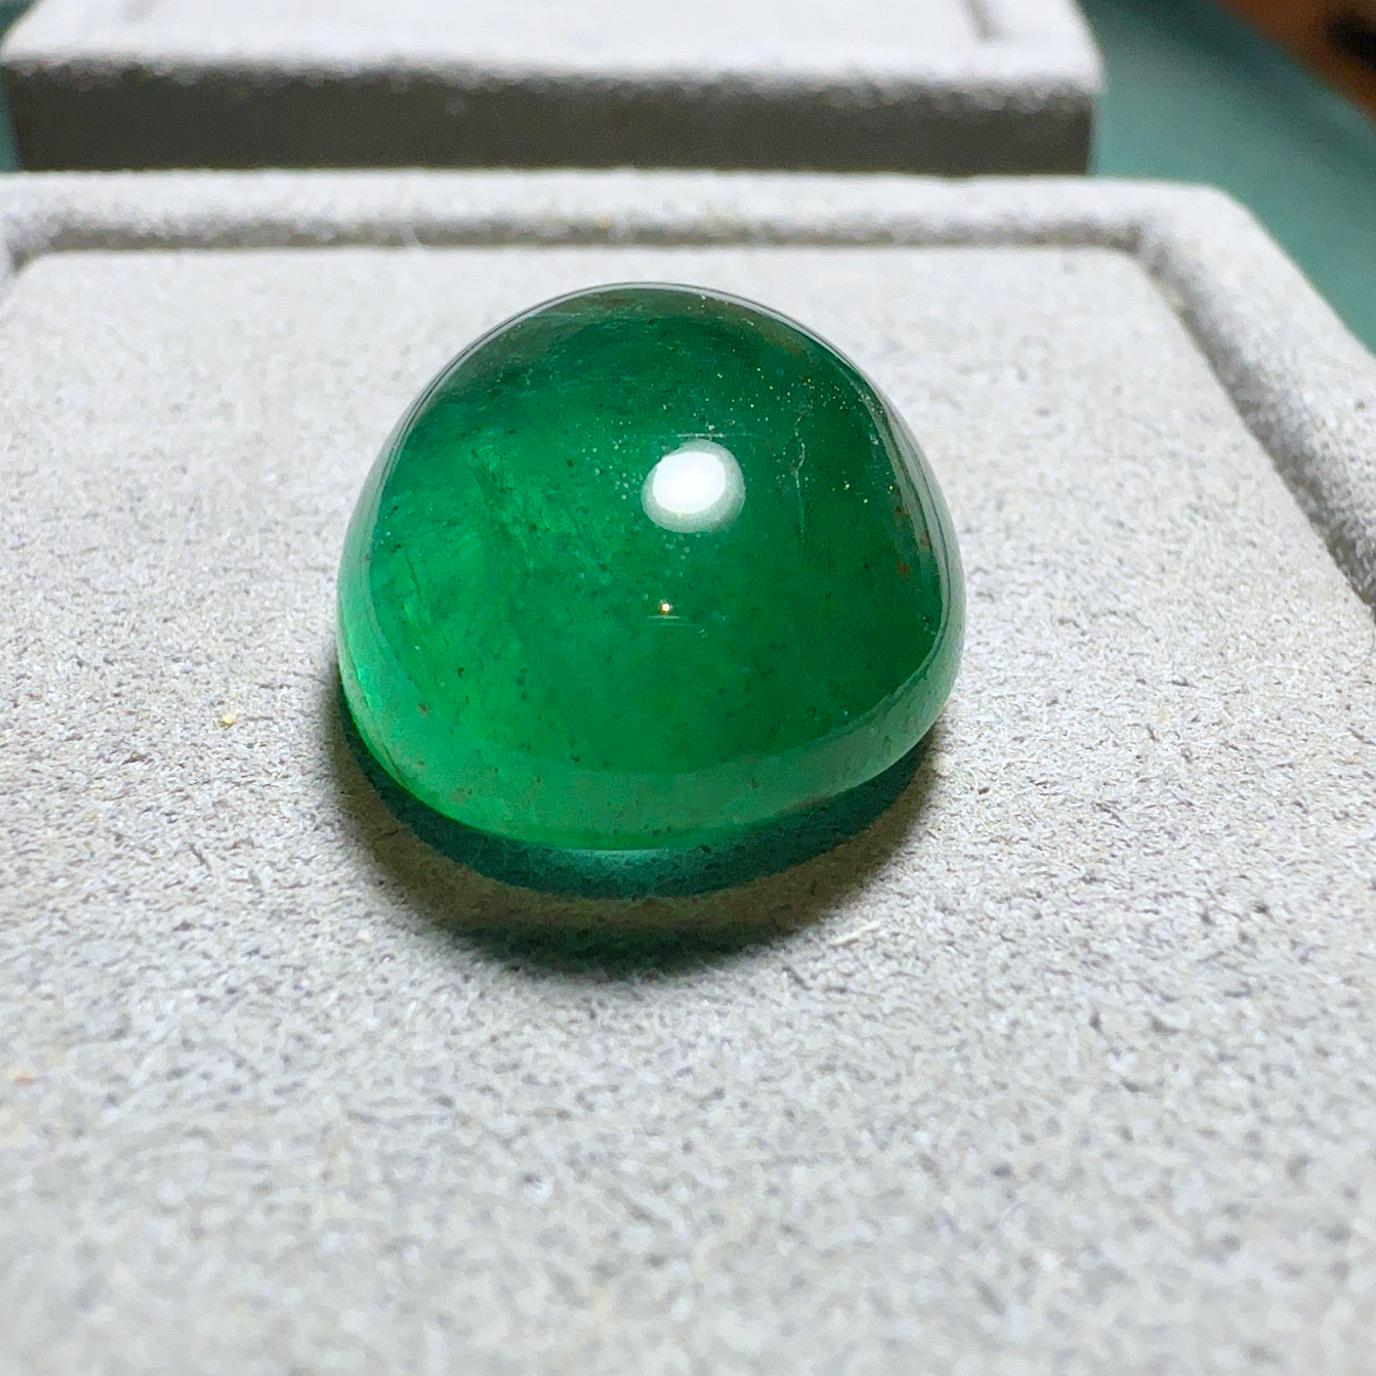 A loose Zambia cabochon gem 
weight :  16.66 ct
Vivid green colour




Emerald’s lush green has soothed souls and excited imaginations since antiquity. Its name comes from the ancient Greek word for green, “smaragdus.” Rome’s Pliny the Elder